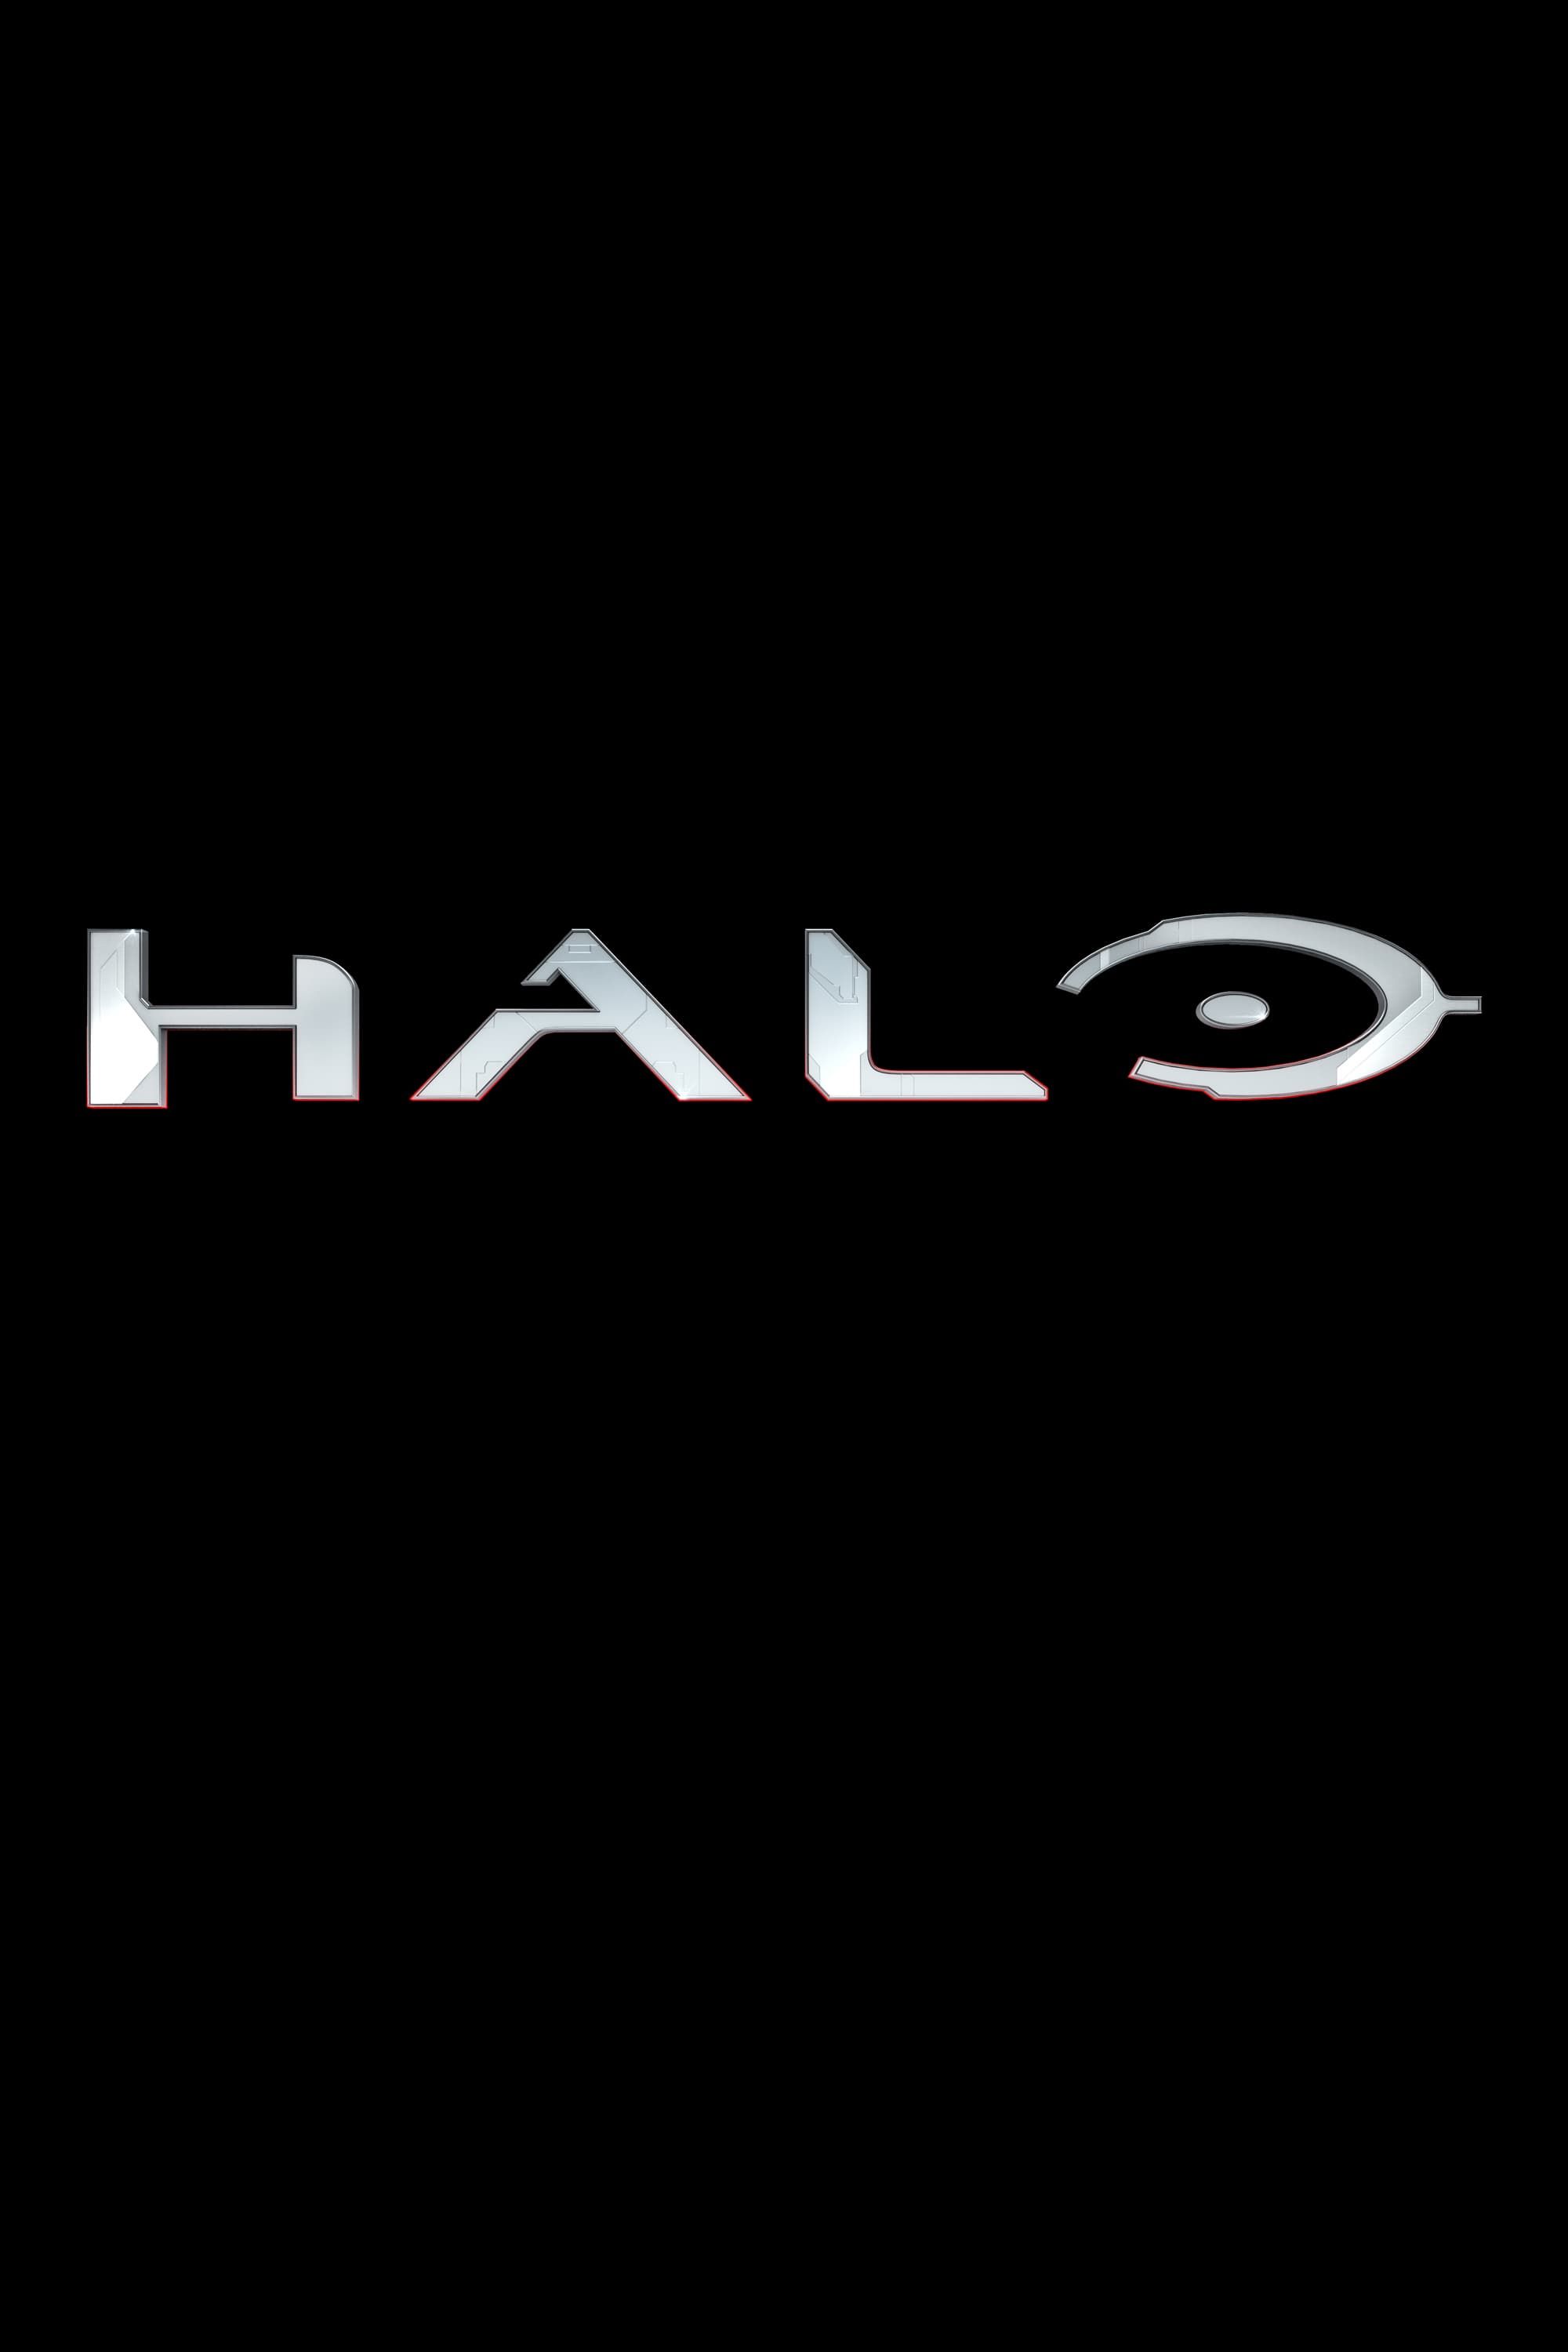 Halo Series Finally Reveals First-Ever Look at Master Chief's Face